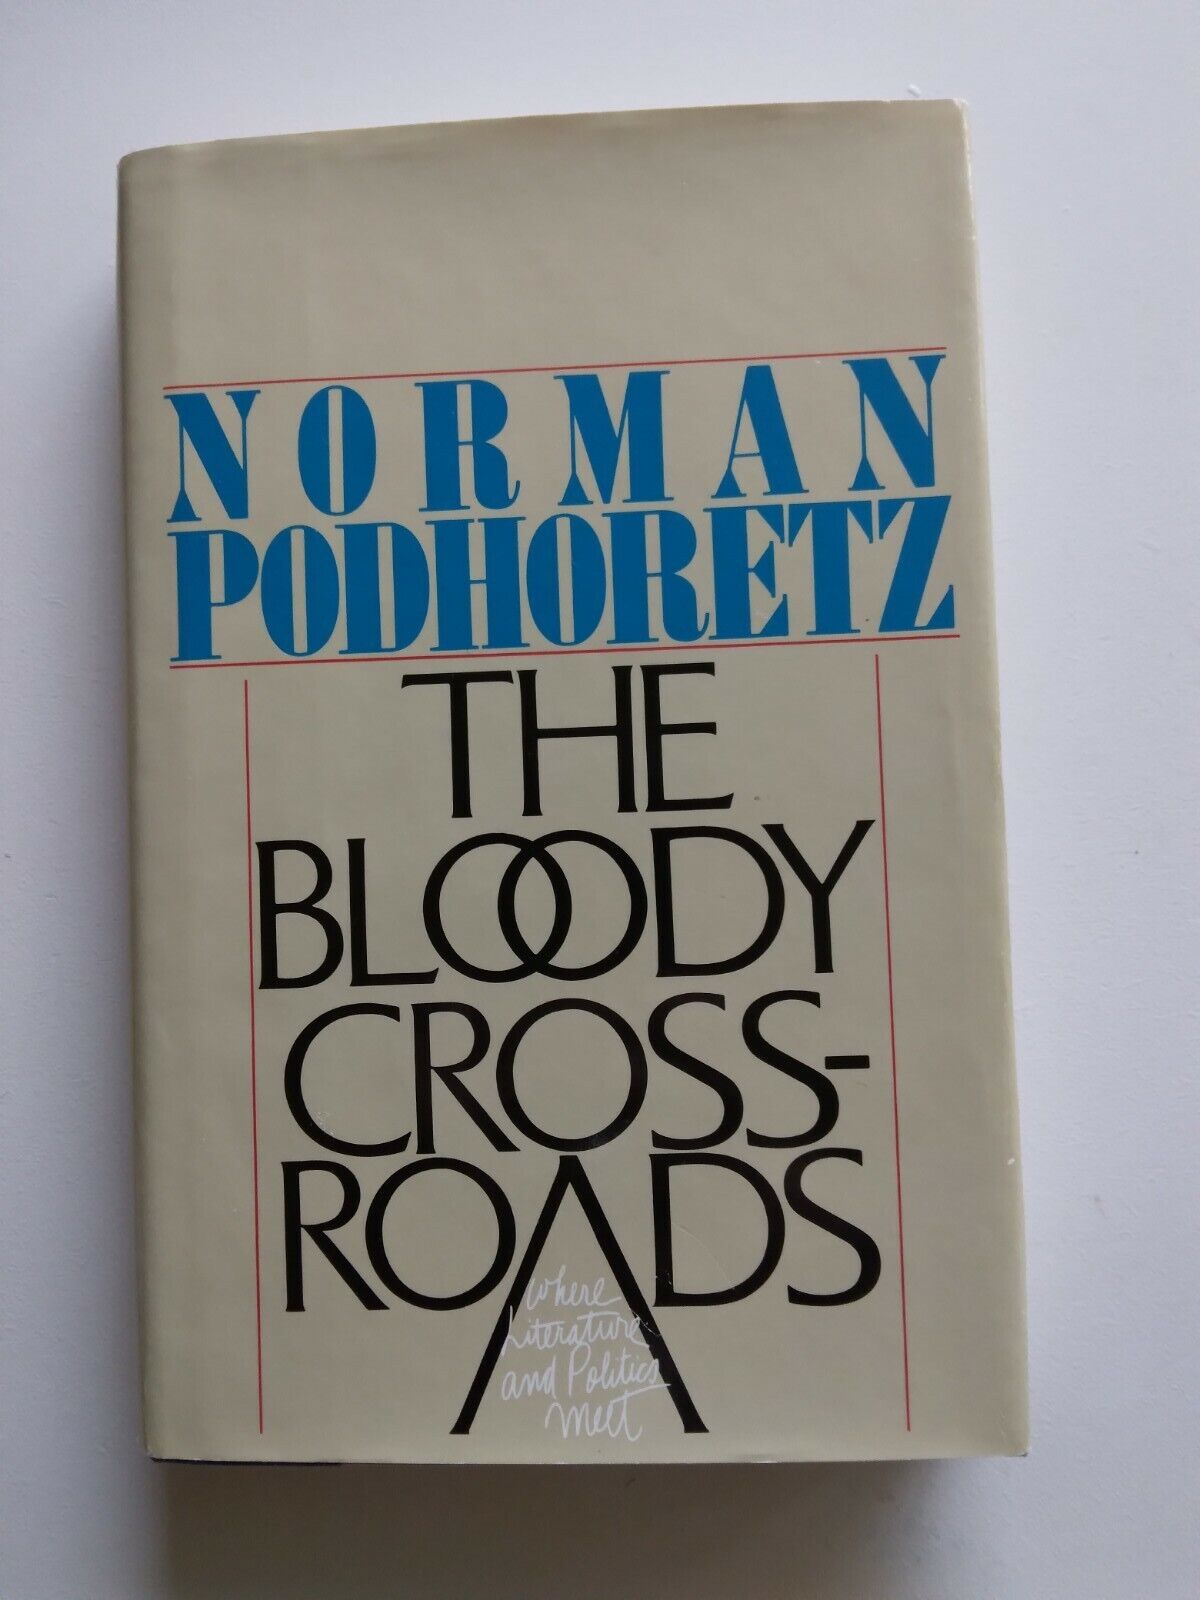 The bloody crossroads by norman podhoretz hardcover